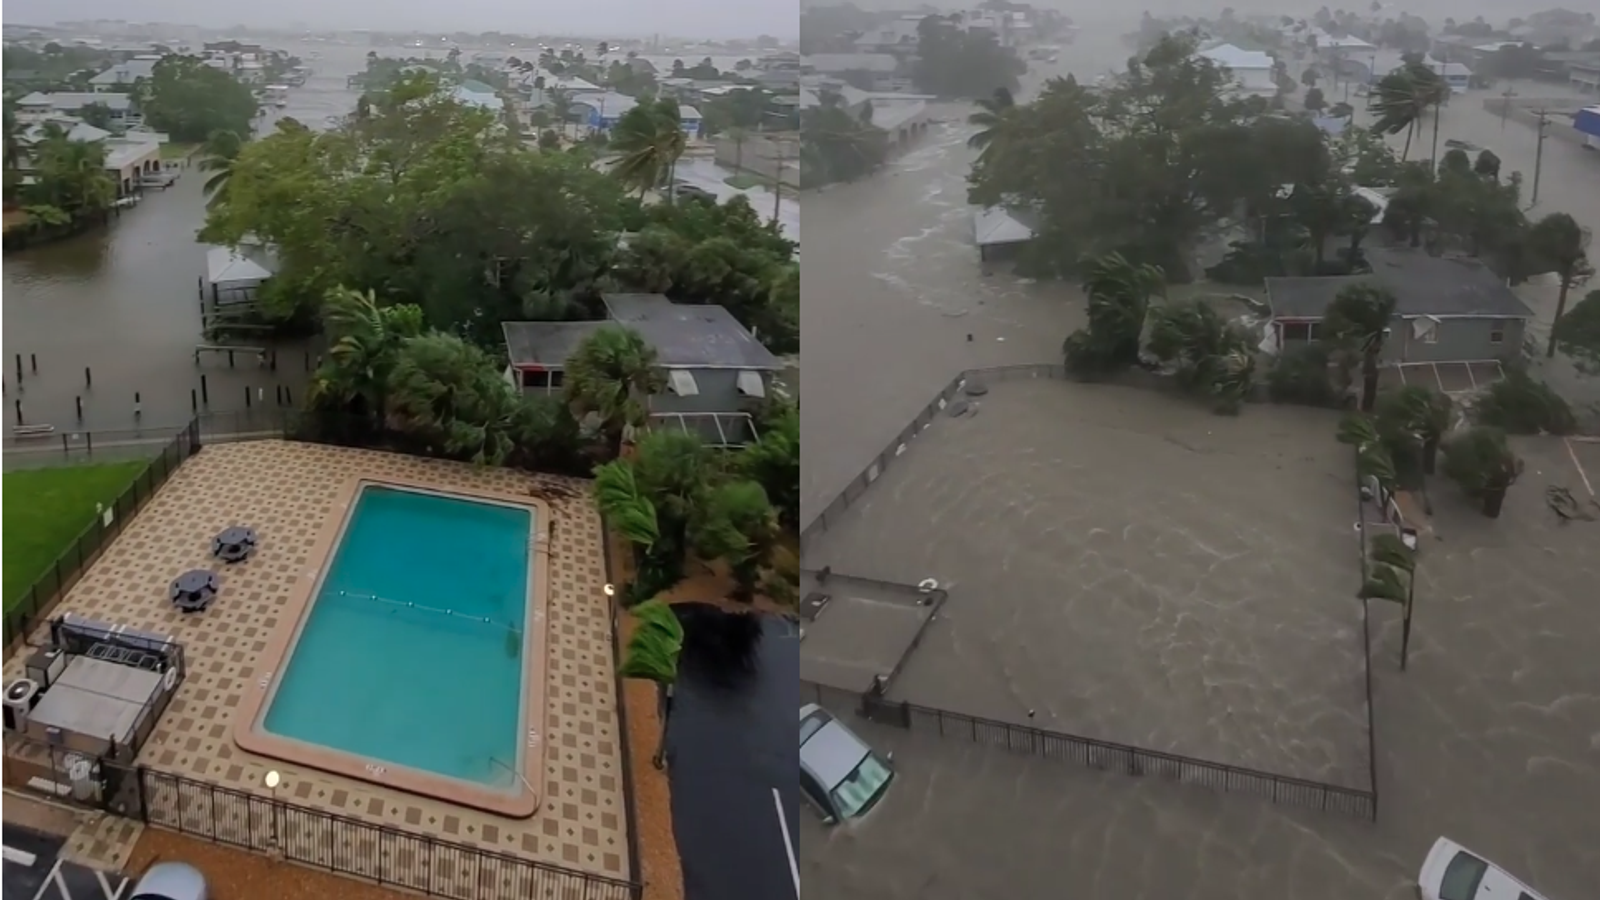 Dramatic before and after images show scale of Hurricane Ian’s destruction in Florida